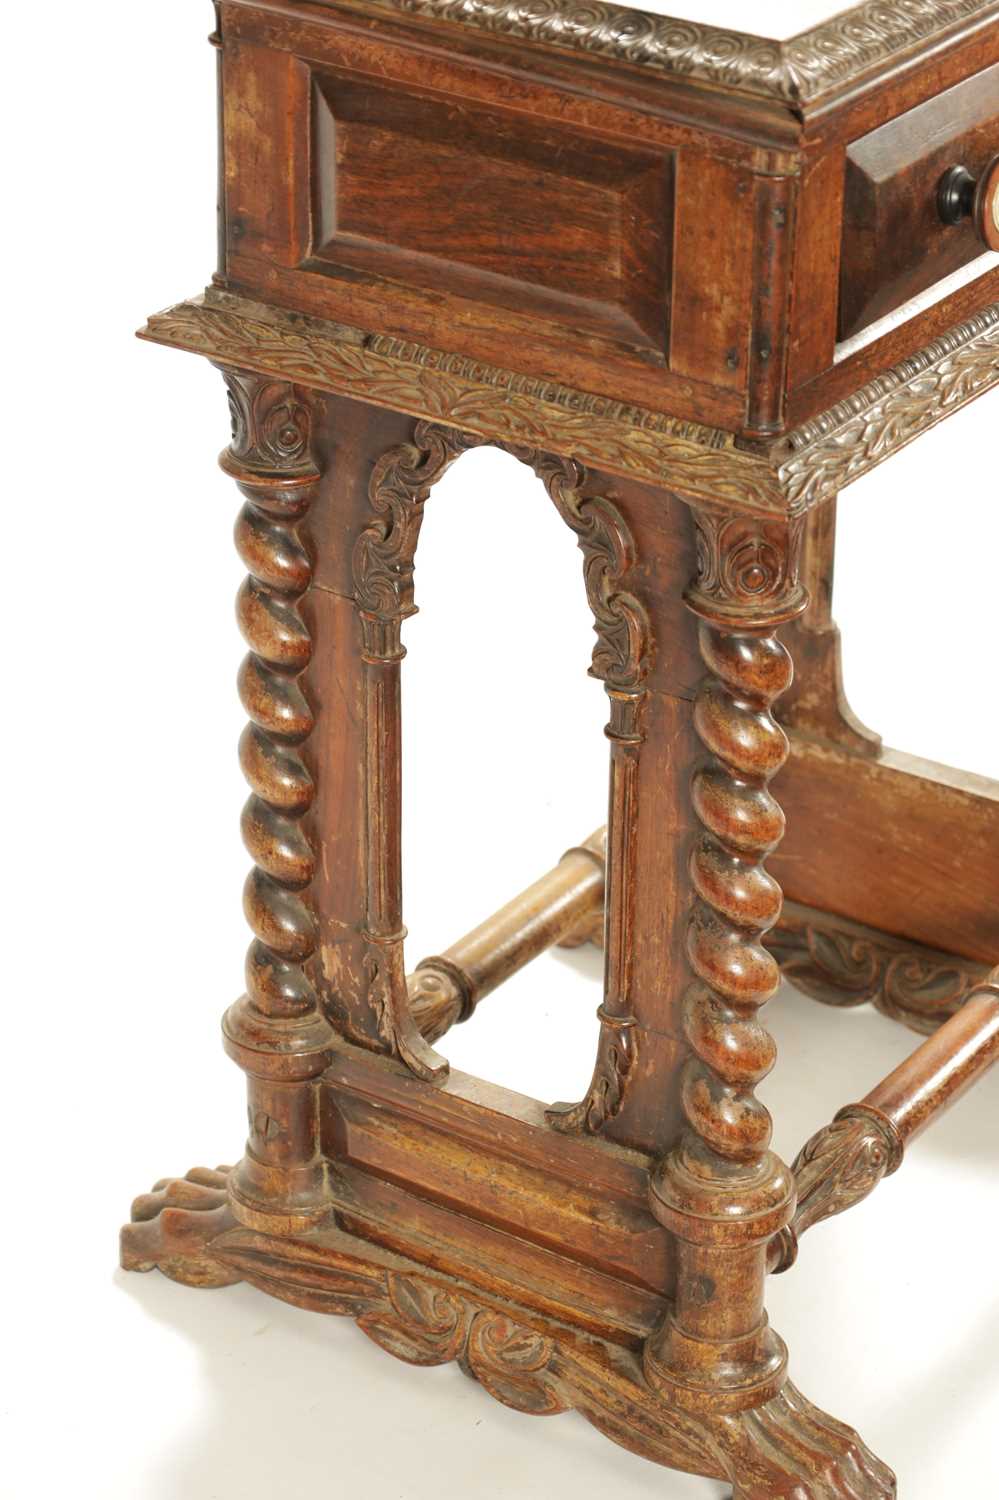 A WILLIAM IV COLONIAL INDIAN PADOUK WOOD WORK TABLE - Image 9 of 10